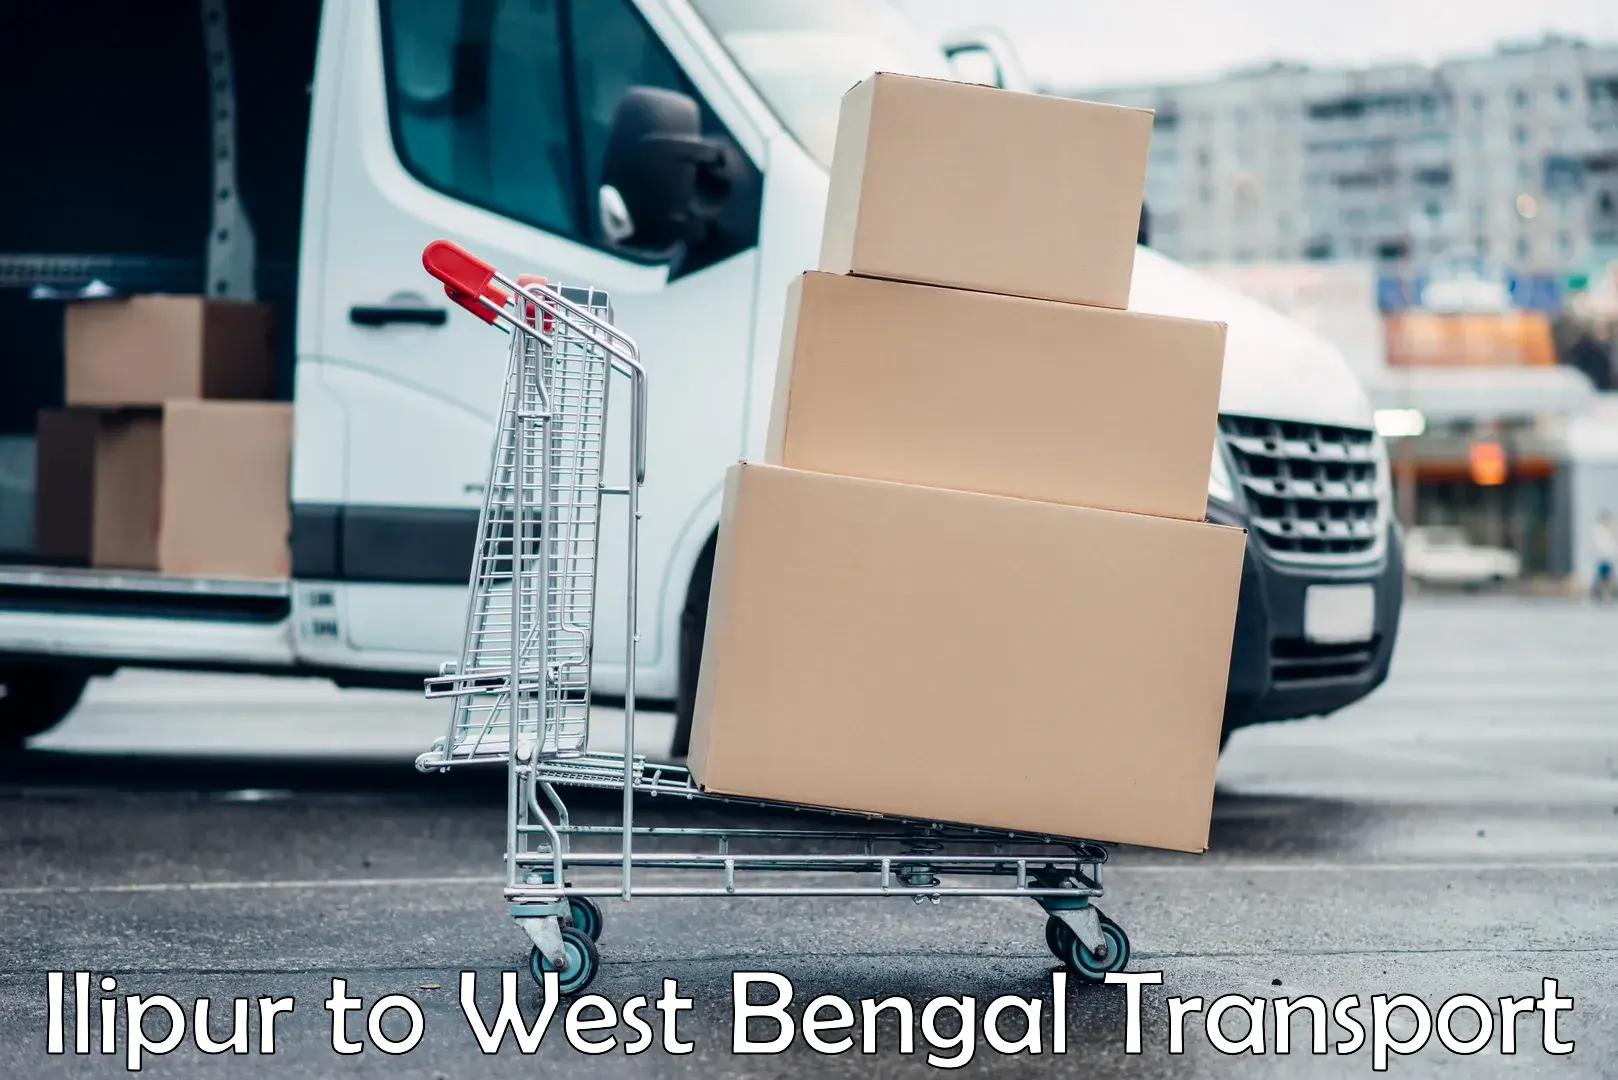 Lorry transport service Ilipur to Howrah